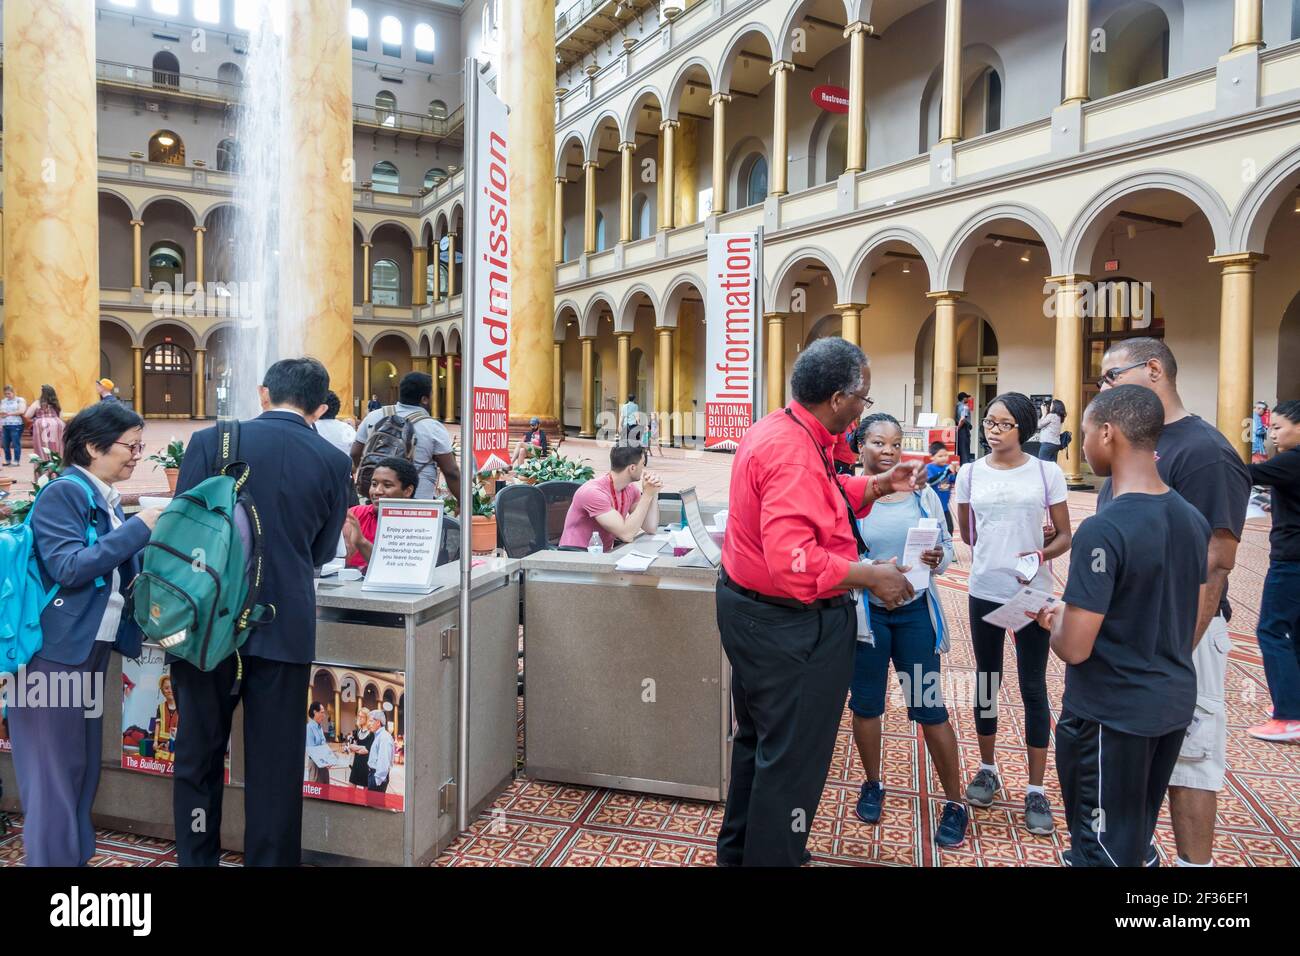 Washington DC,National Building Museum Pension Building,interior inside Great Hall arches information desk,Black man woman female teen student boy gir Stock Photo